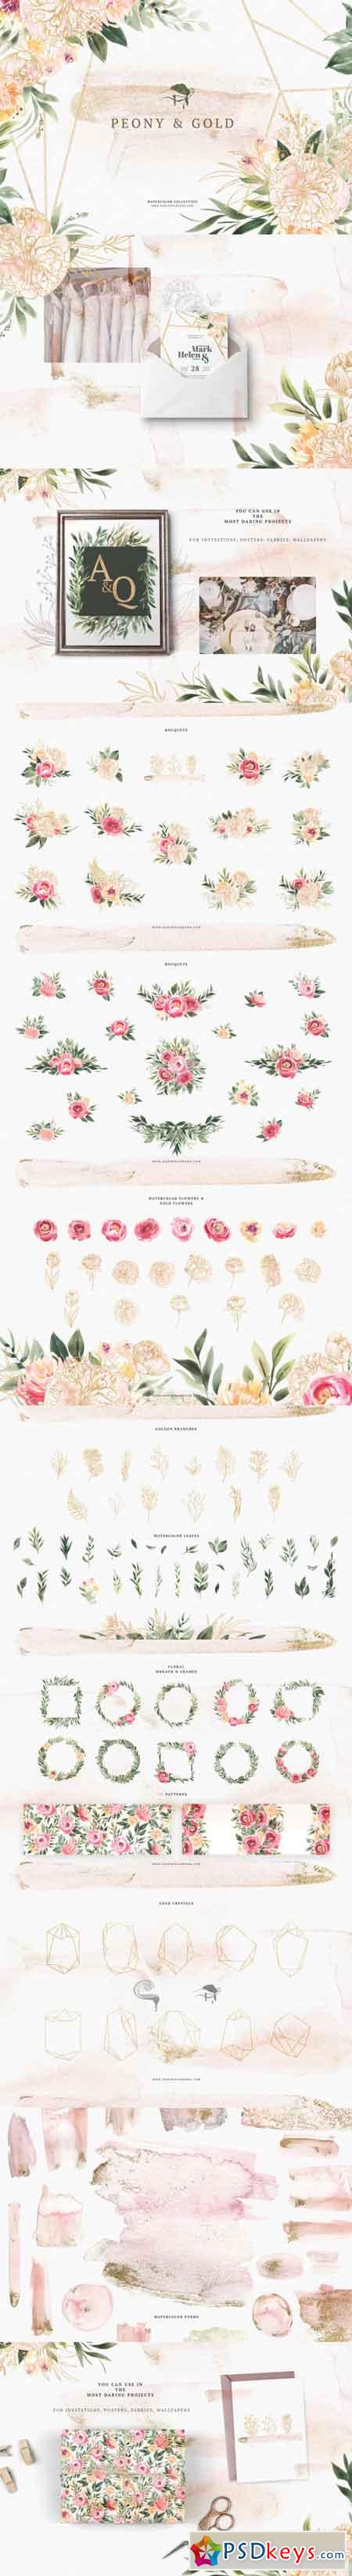 Watercolor Peony & Gold 3485989